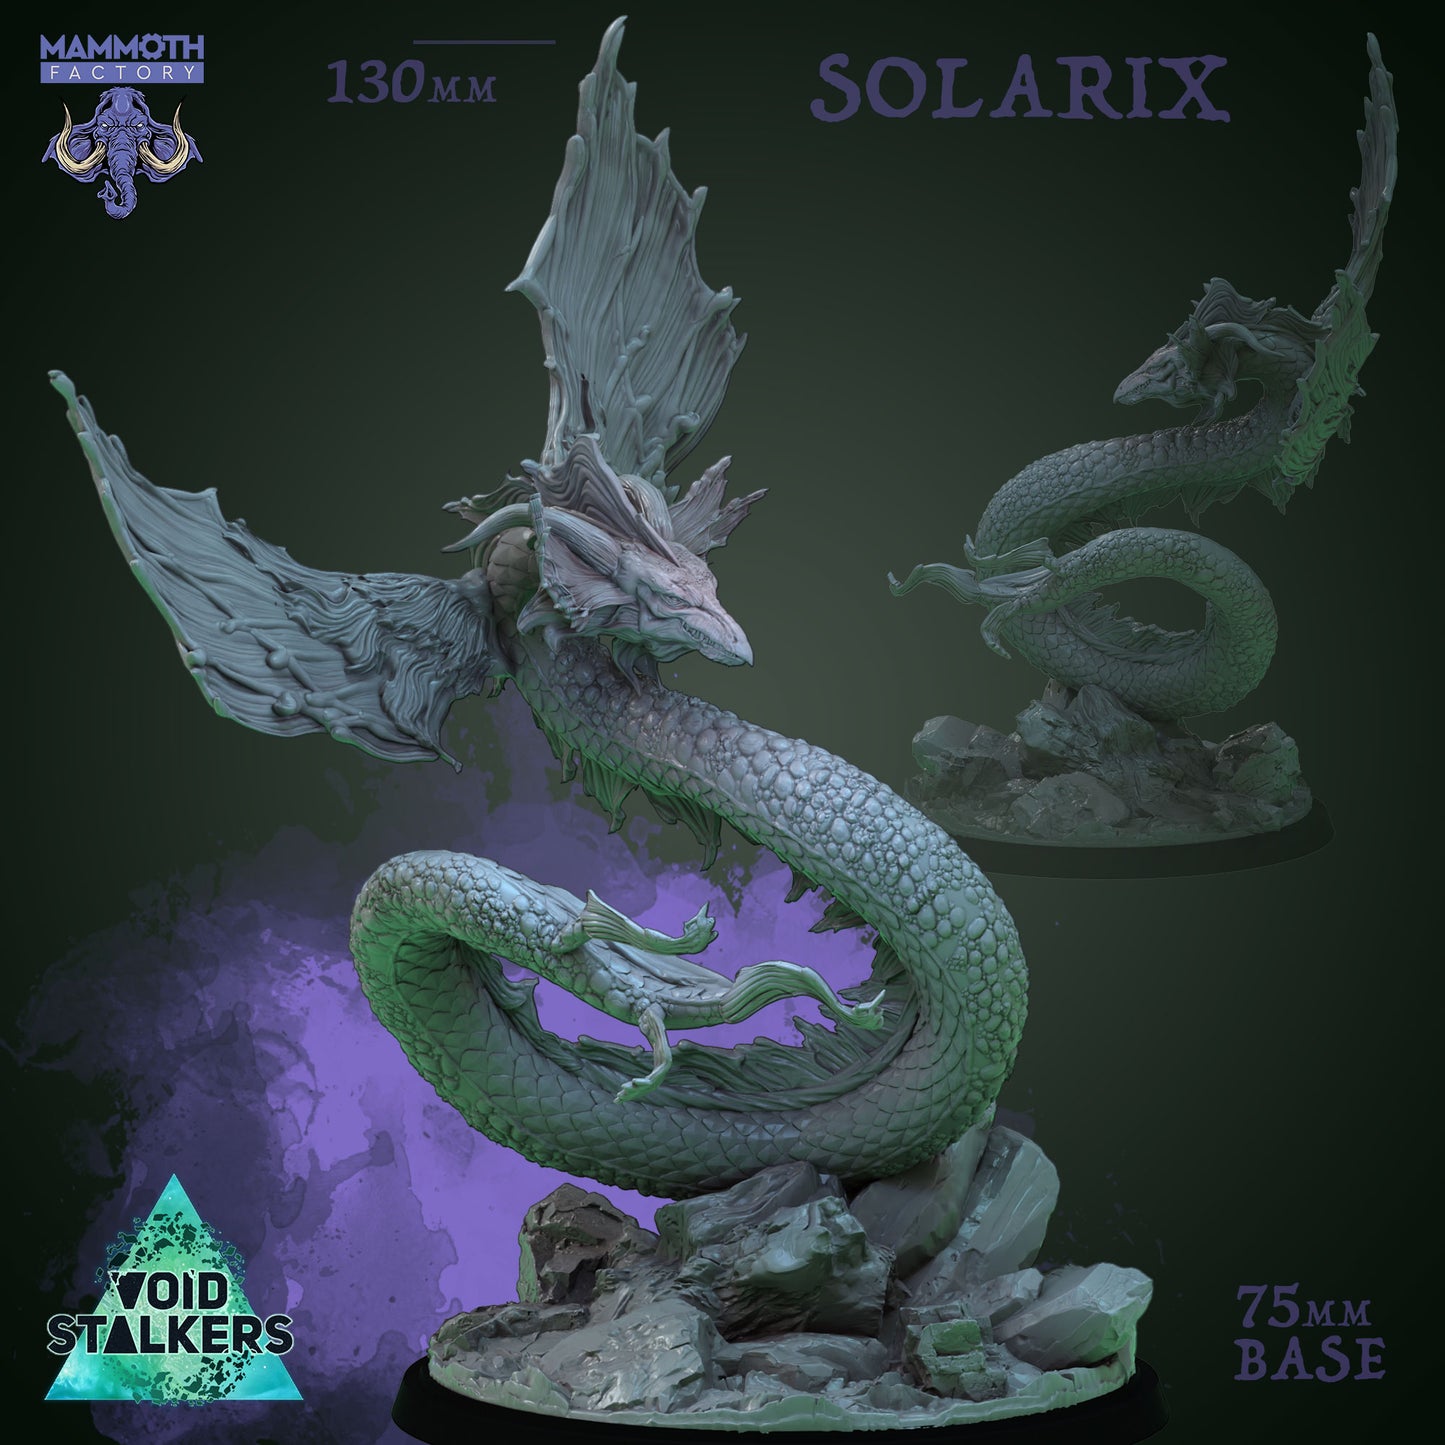 Solarix Drache Miniatur | Dungeons and Dragons | Tabletop | RPG | D&D | Mammoth Factory